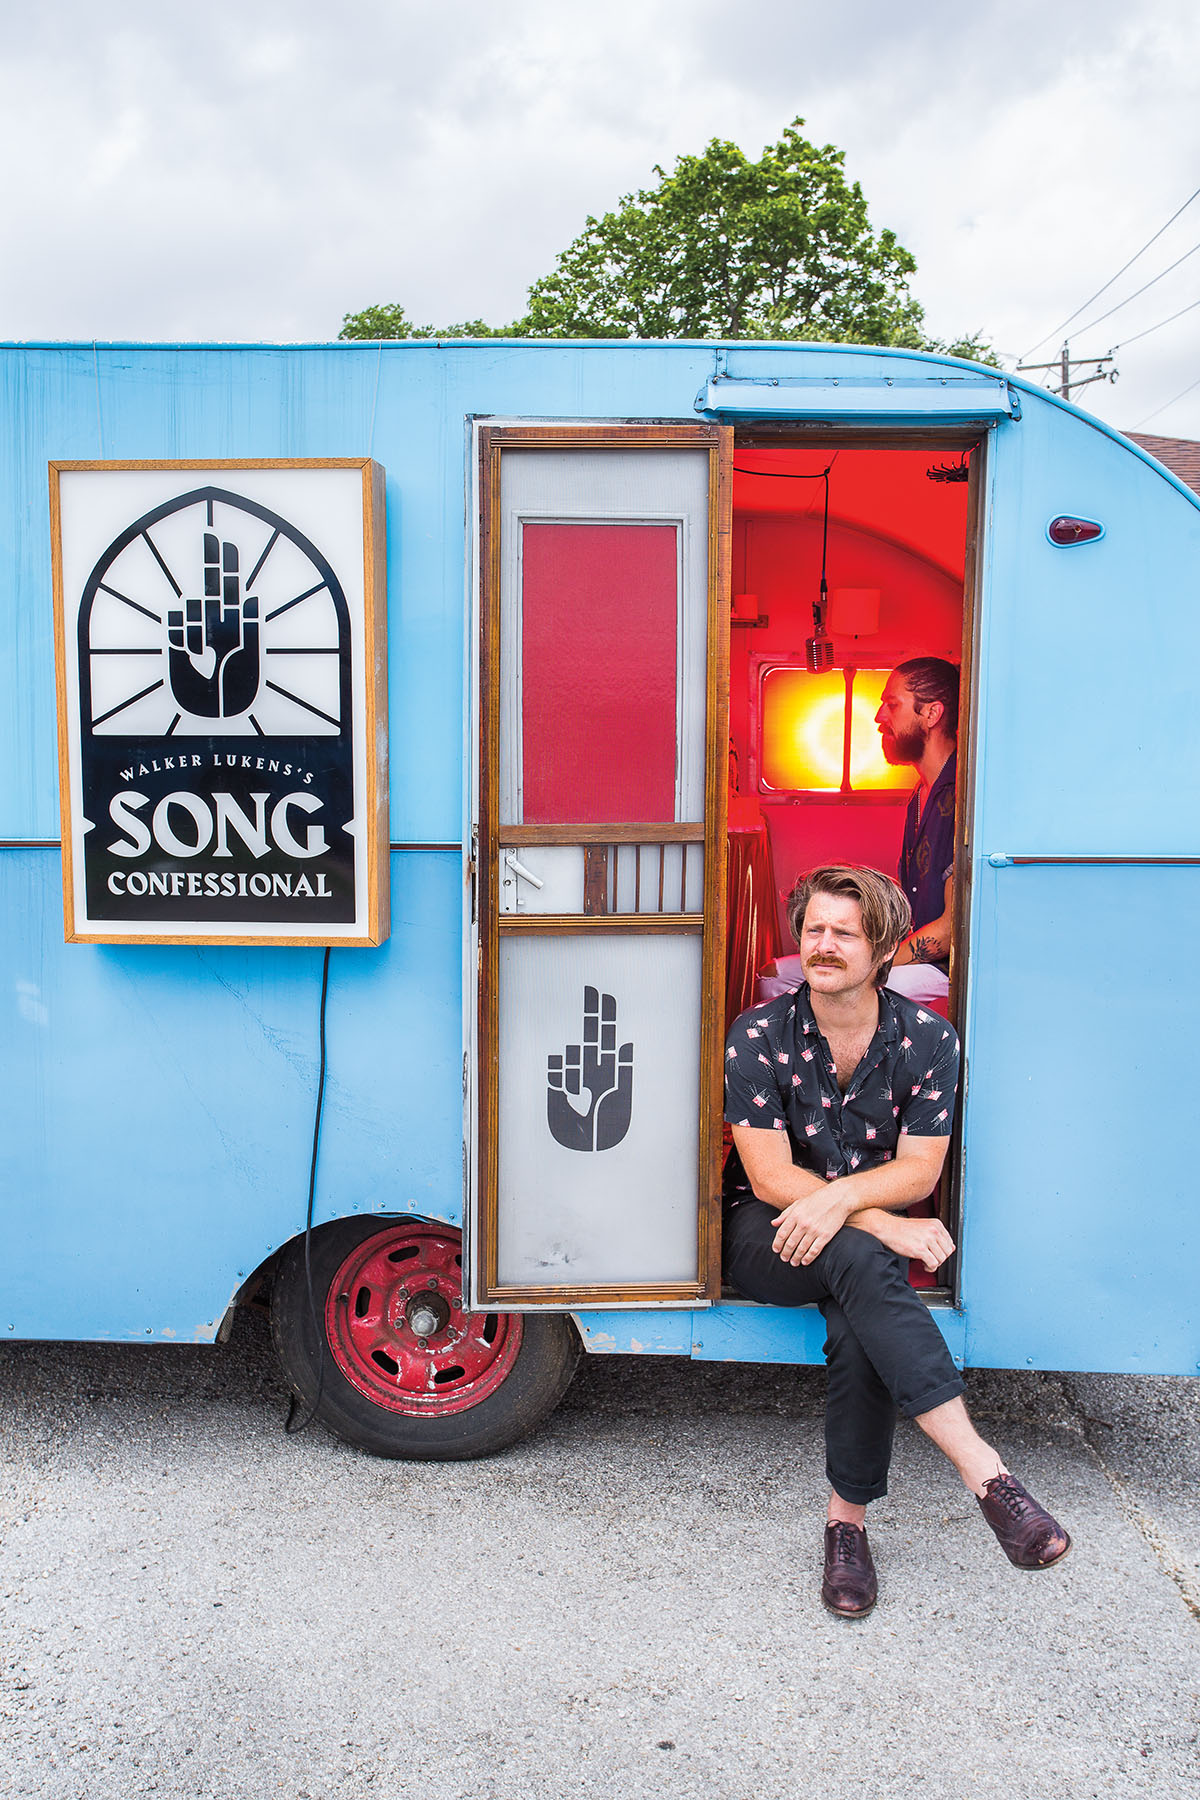 A man sits cross-legged in the doorway of a blue trailer with a sign reading "Walker Lukin's Song Confessional"